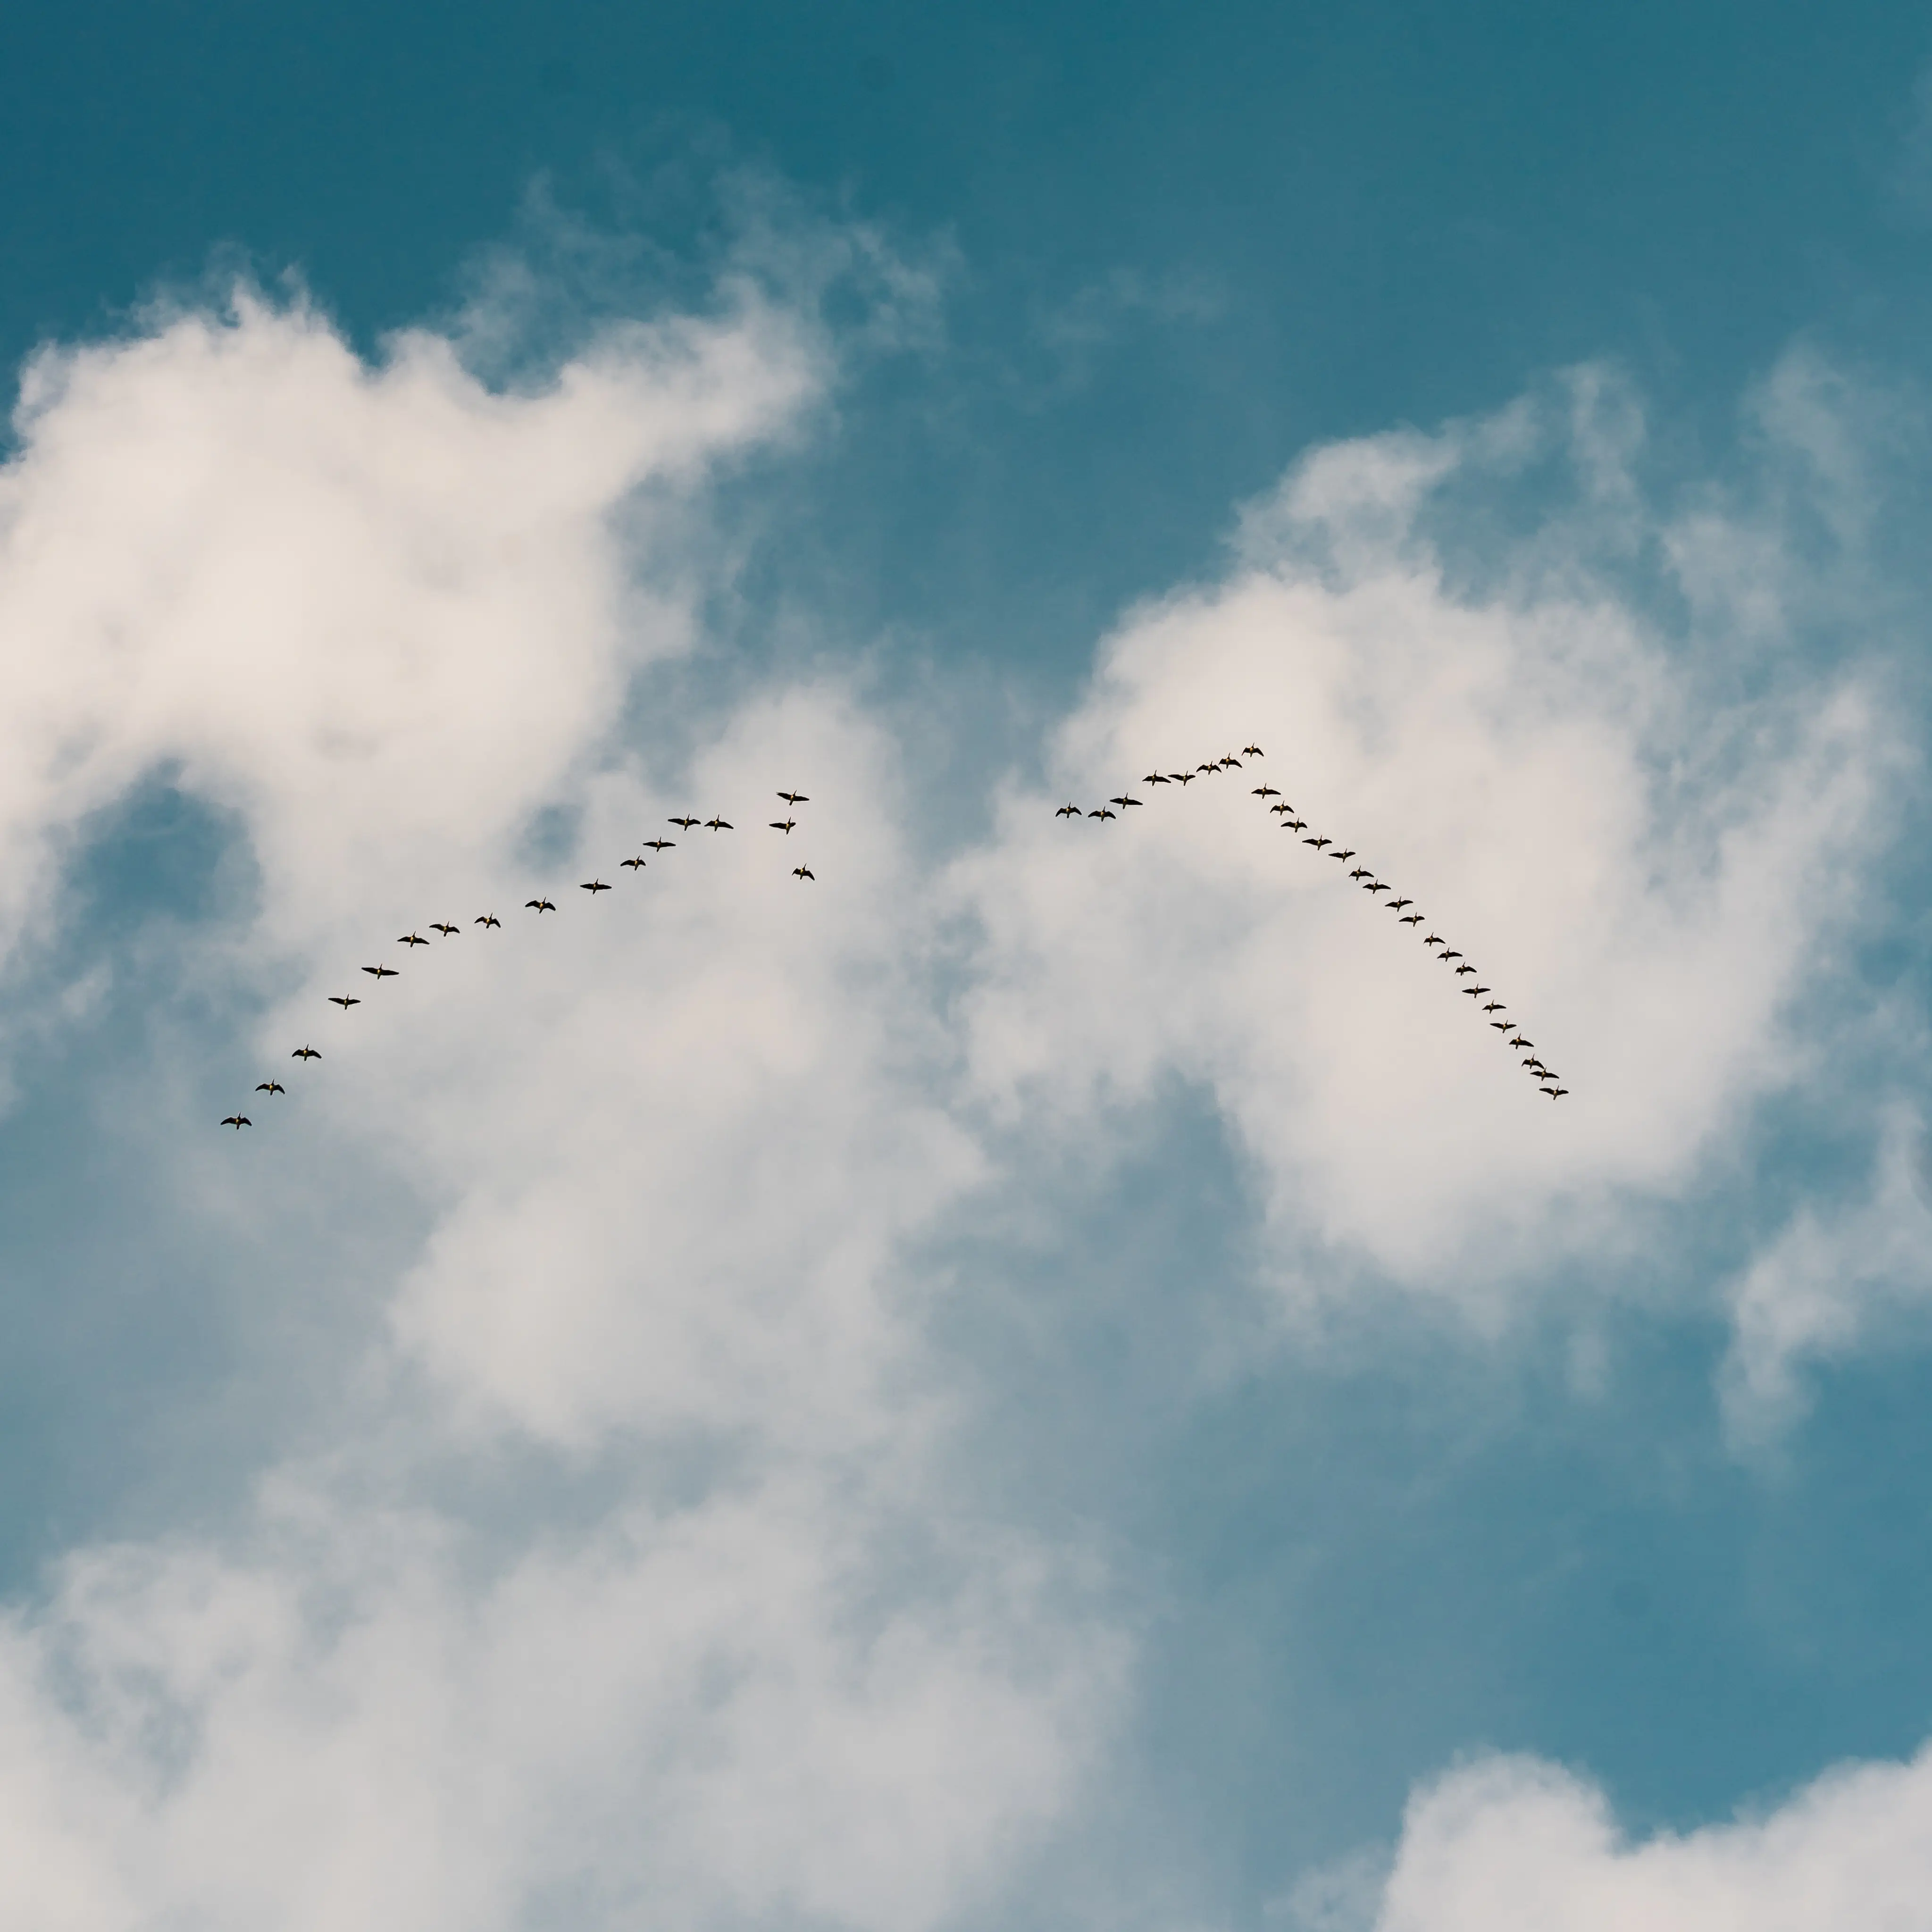 A flock of birds flying in formation